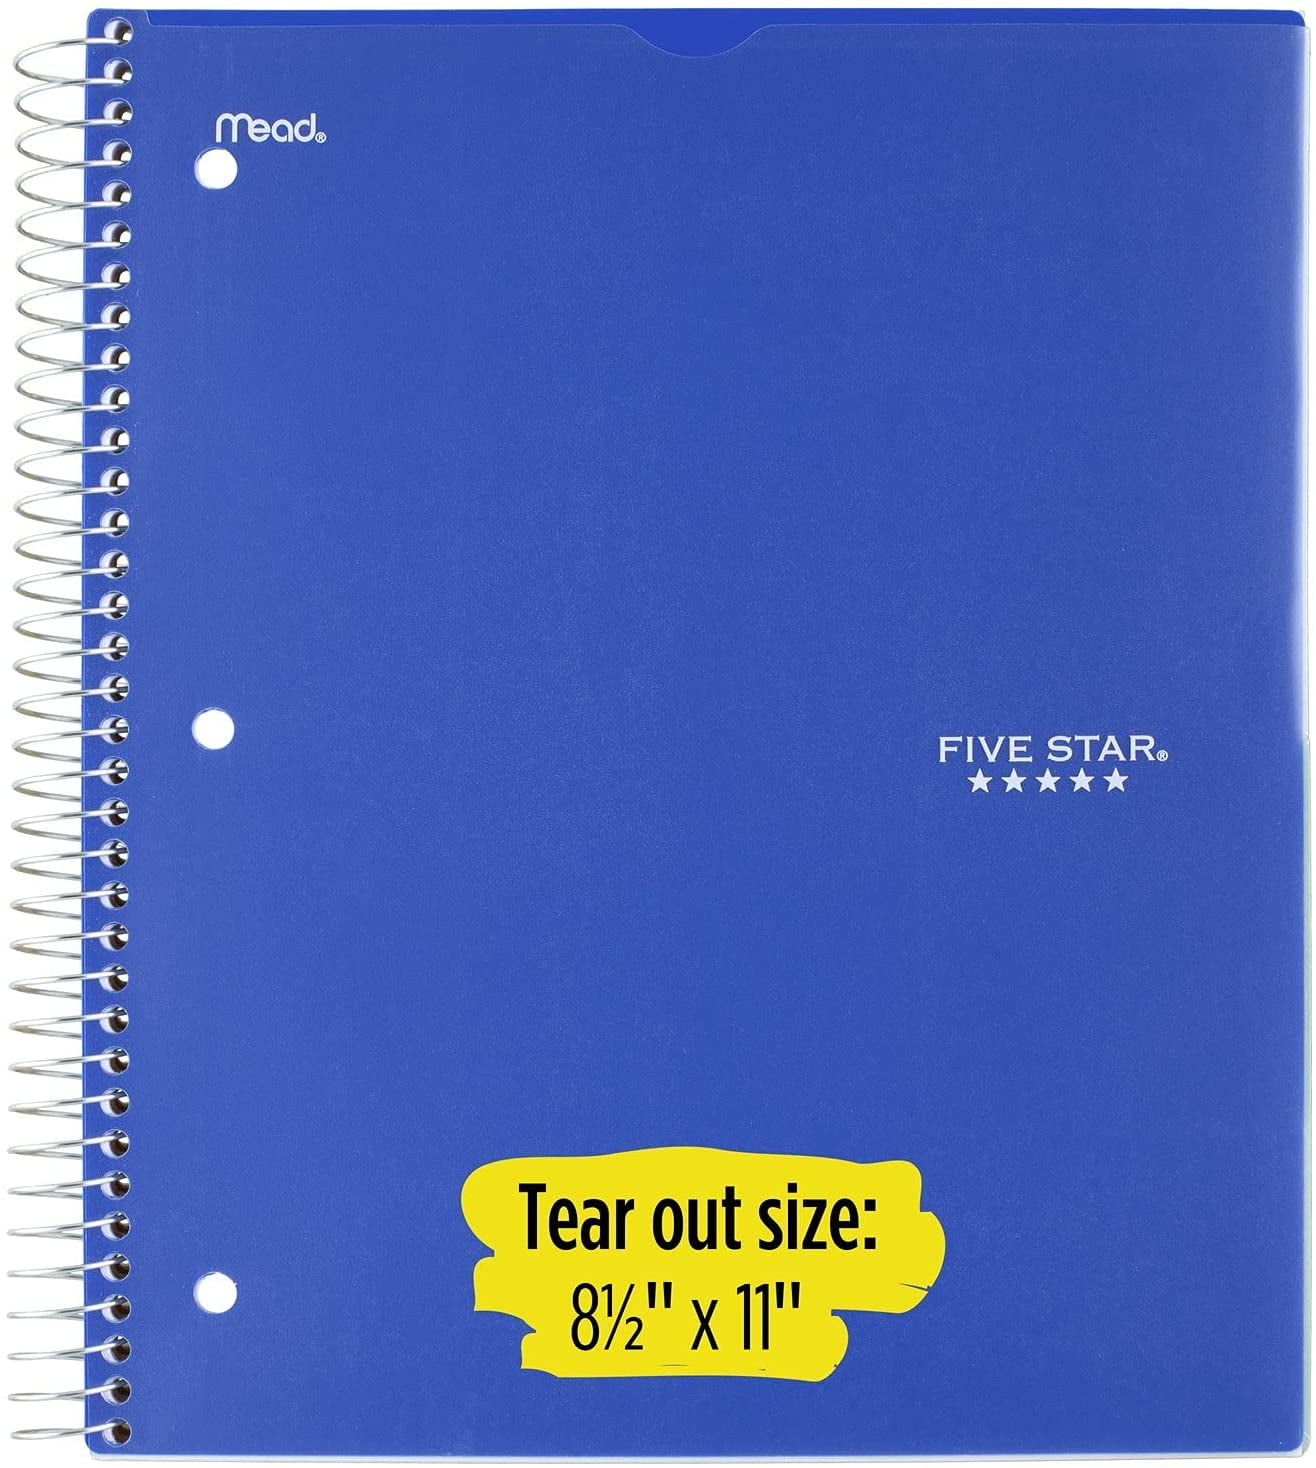 Pineapple Notebook Ruled Pages 5x8 5x8 inches / 12.7x20.3cm / Junior Legal Pad / Nearly A5 Sea Green Edition Premium: Fun notebook 96 ruled/lined pages